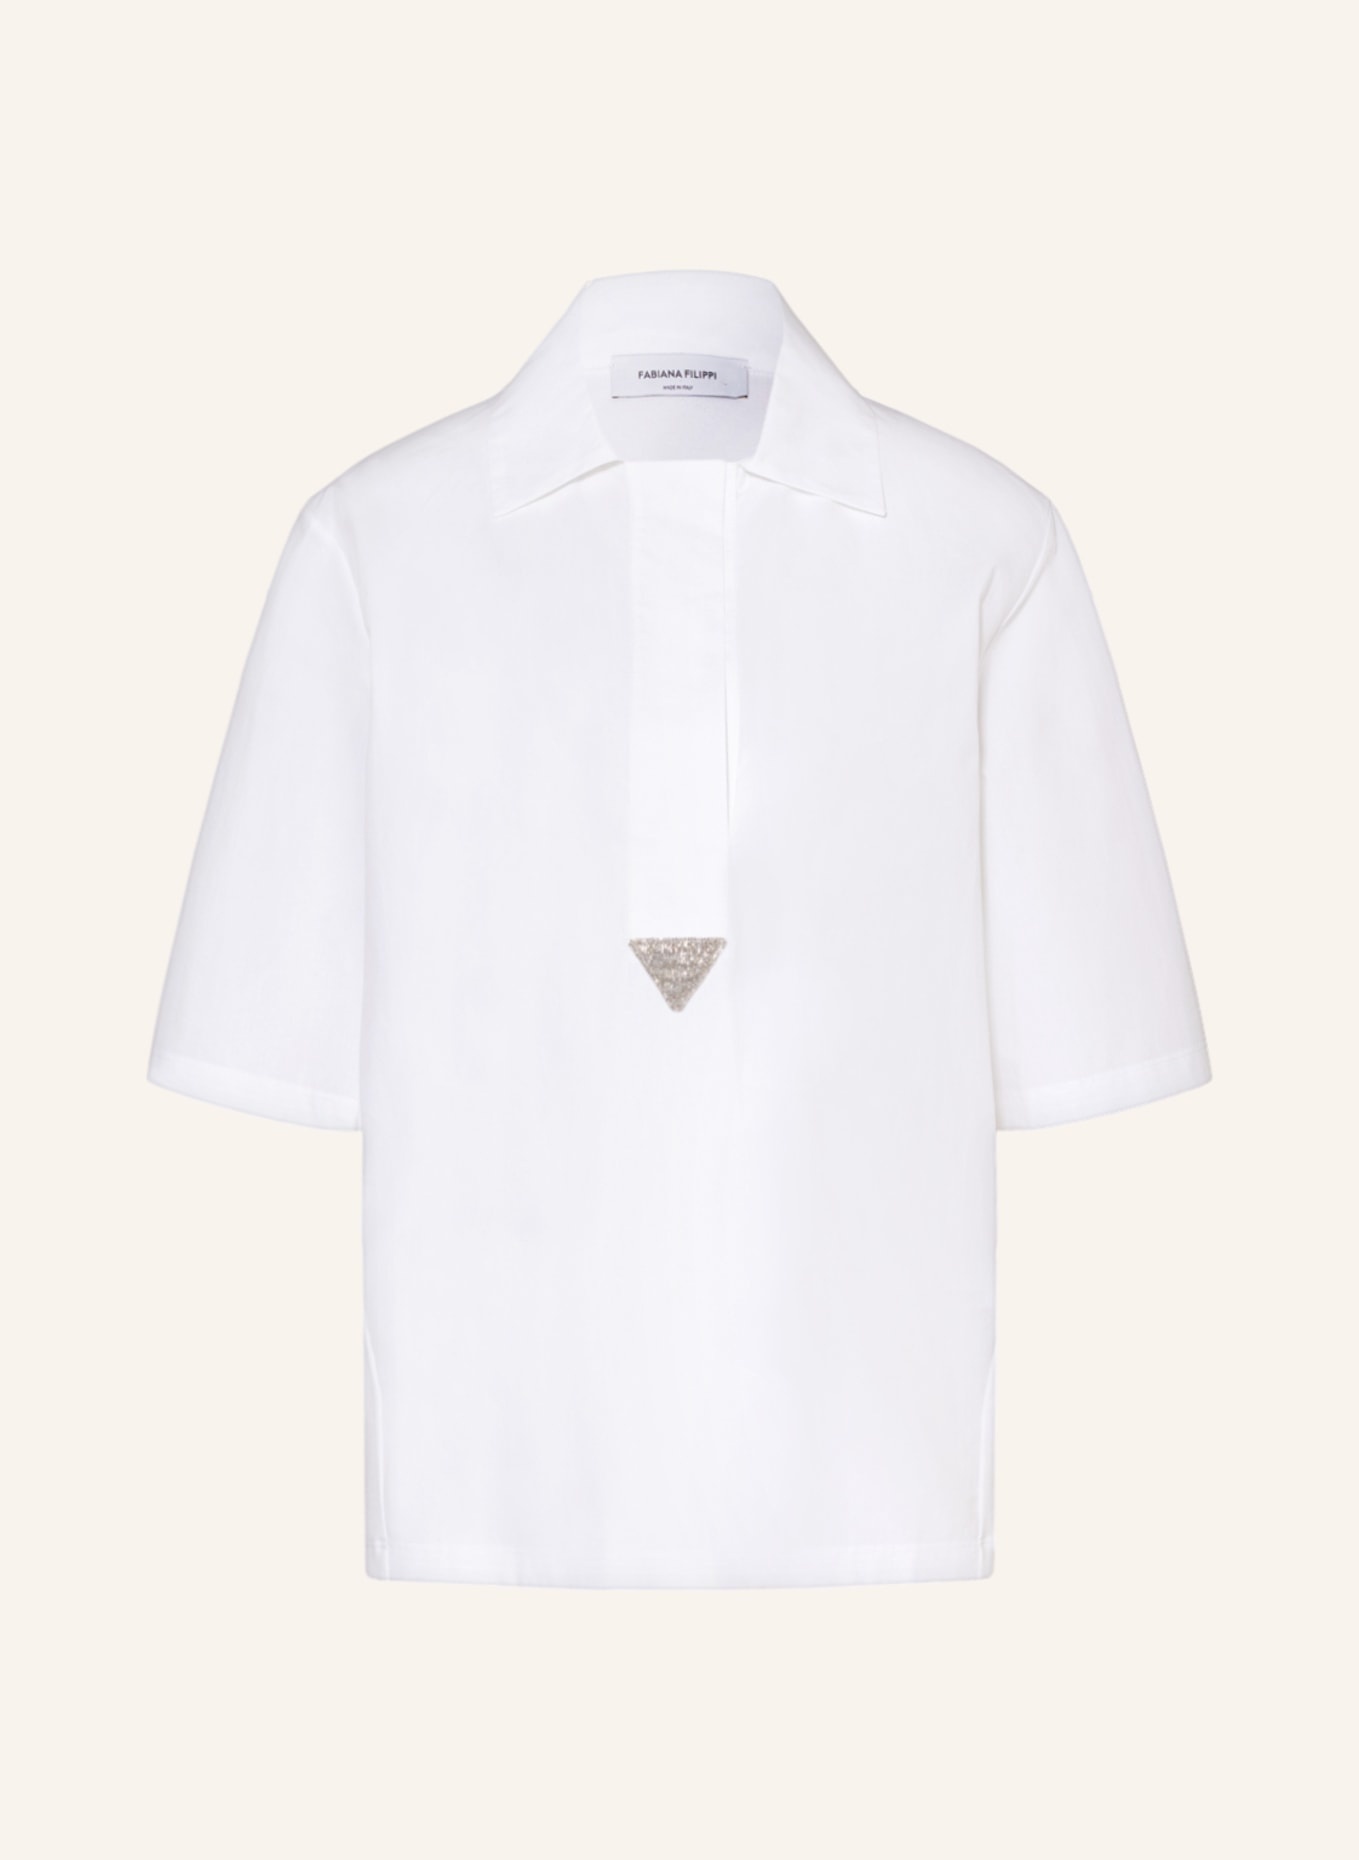 FABIANA FILIPPI Shirt blouse in mixed materials with decorative gems, Color: WHITE (Image 1)